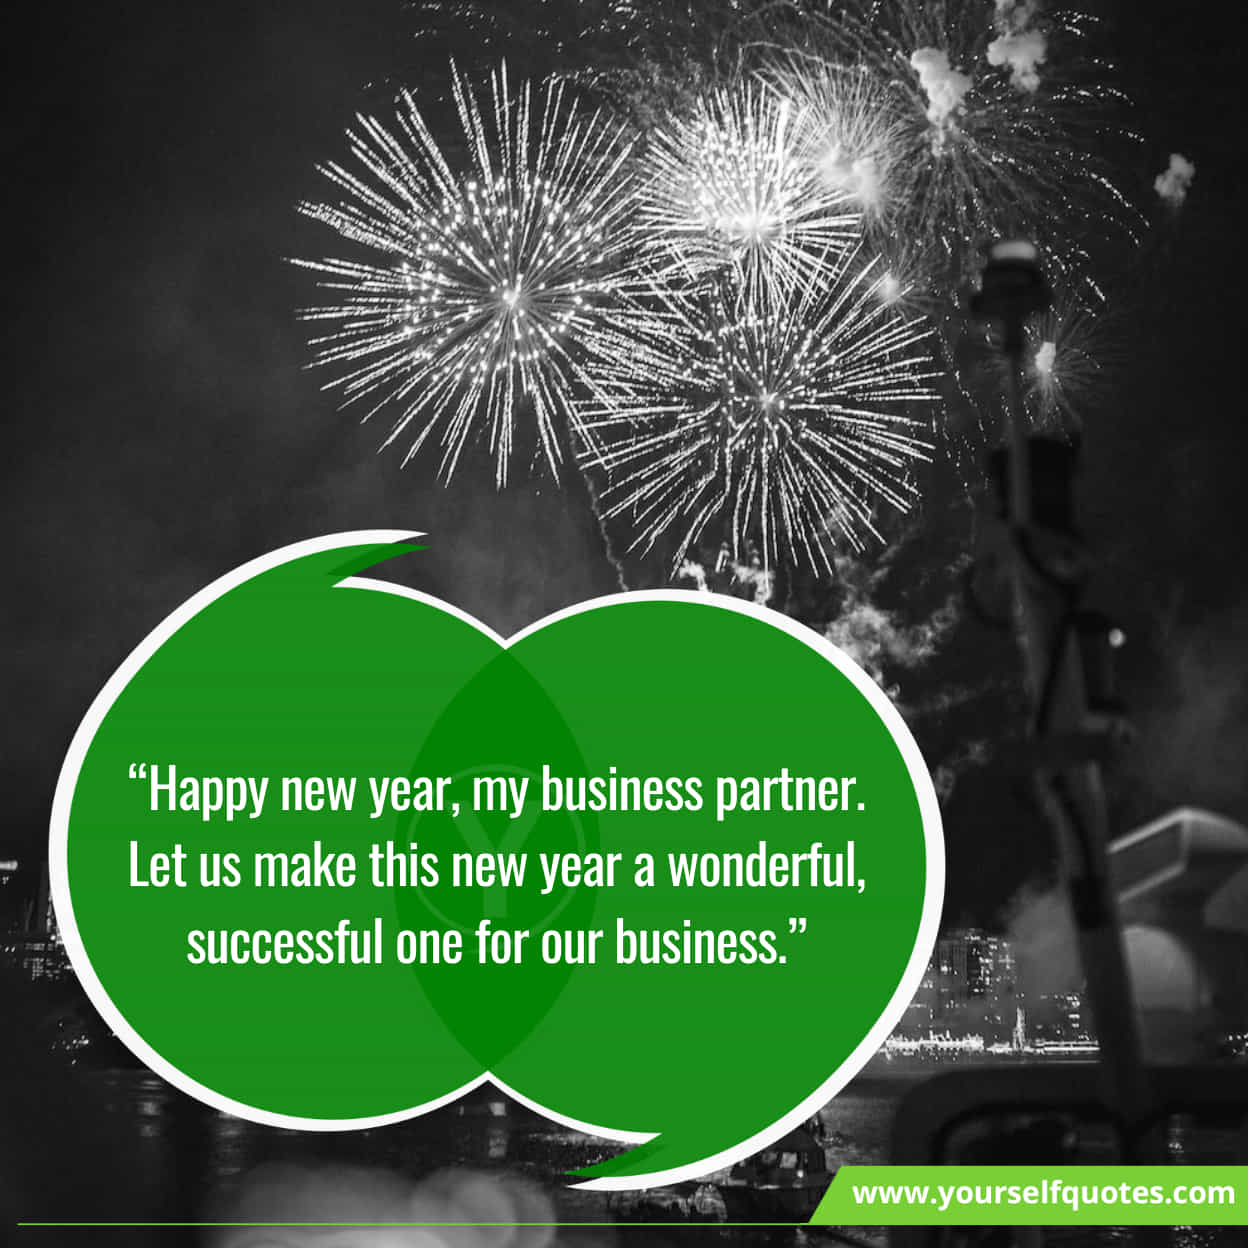 Happy New Year Greetings To Business